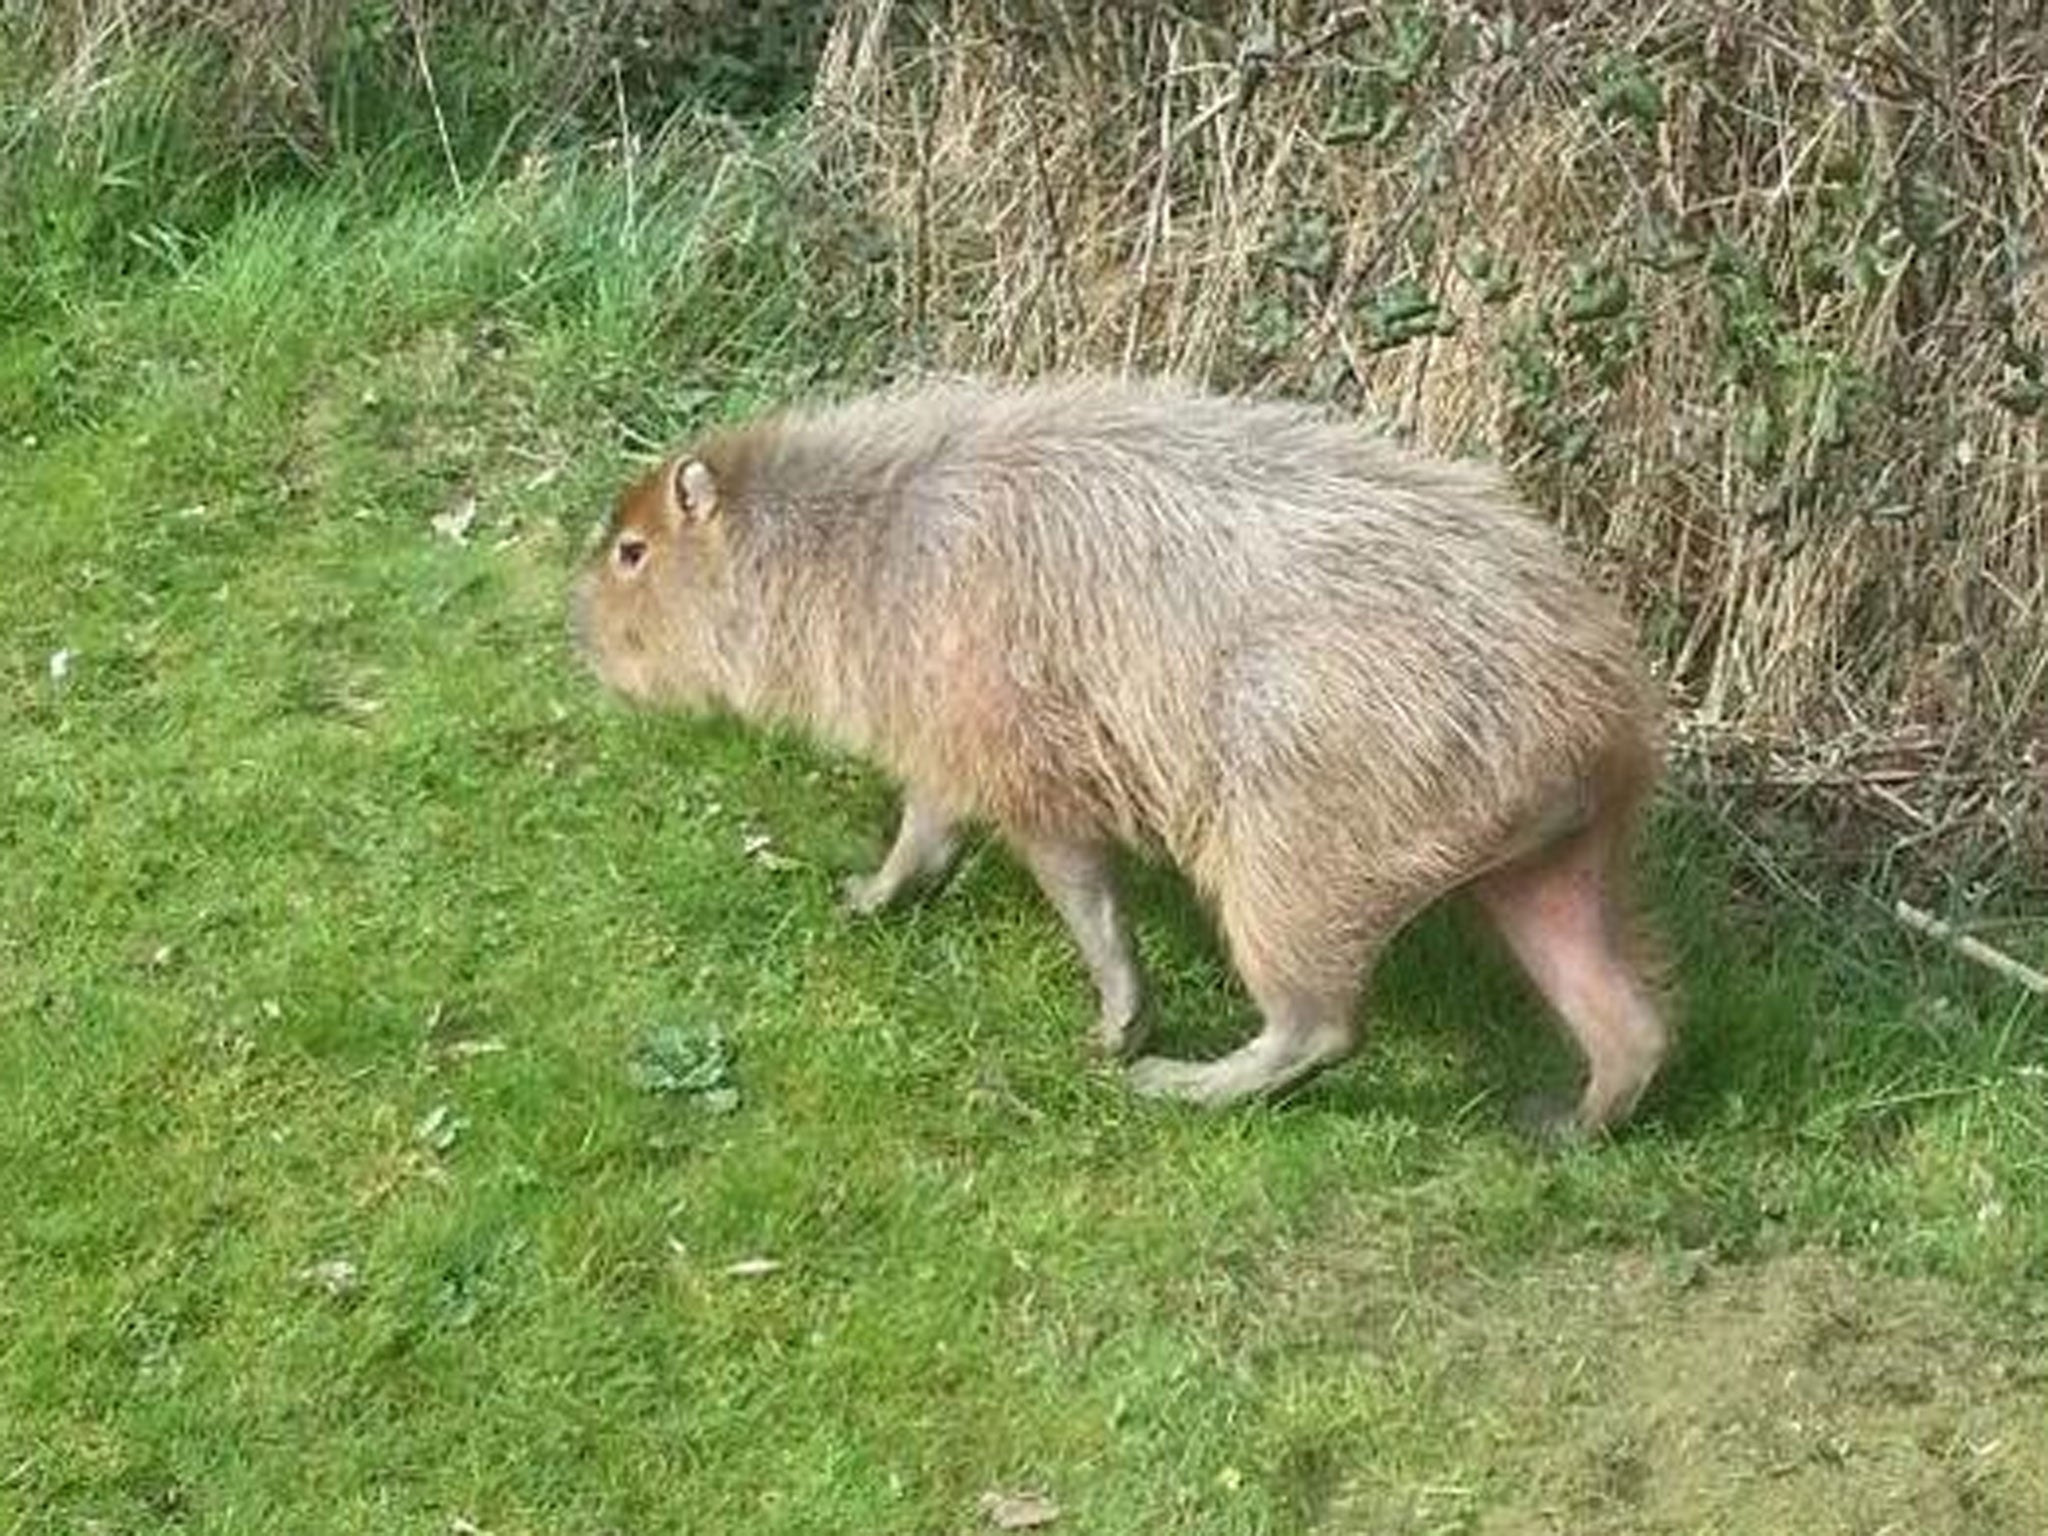 A capybara - the largest species of rodent in the world - has been causing a commotion on a golf course in Essex